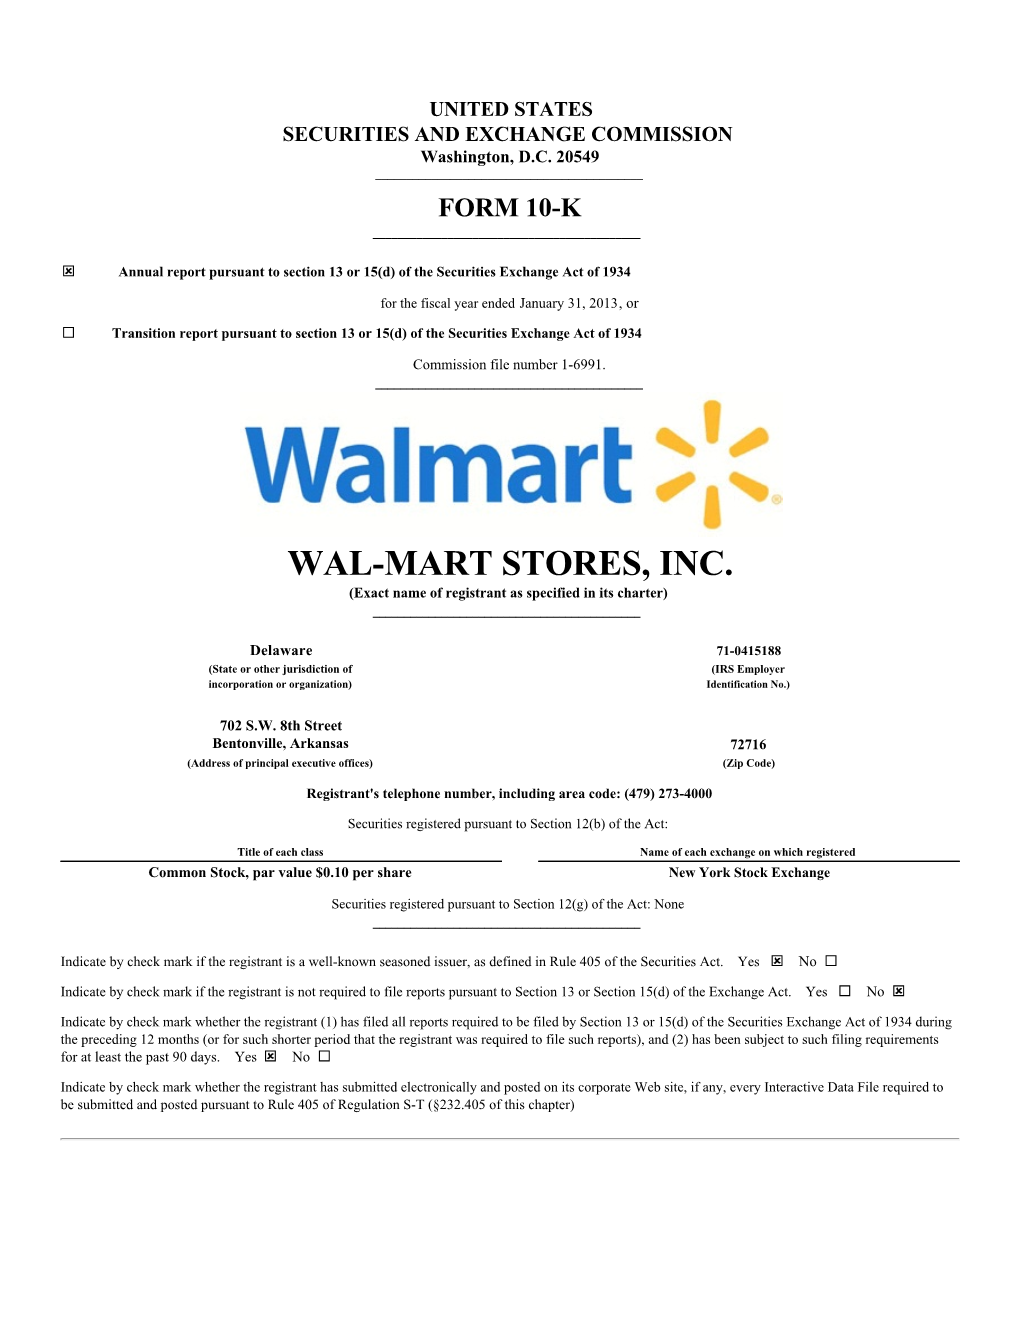 WAL-MART STORES, INC. (Exact Name of Registrant As Specified in Its Charter) ______